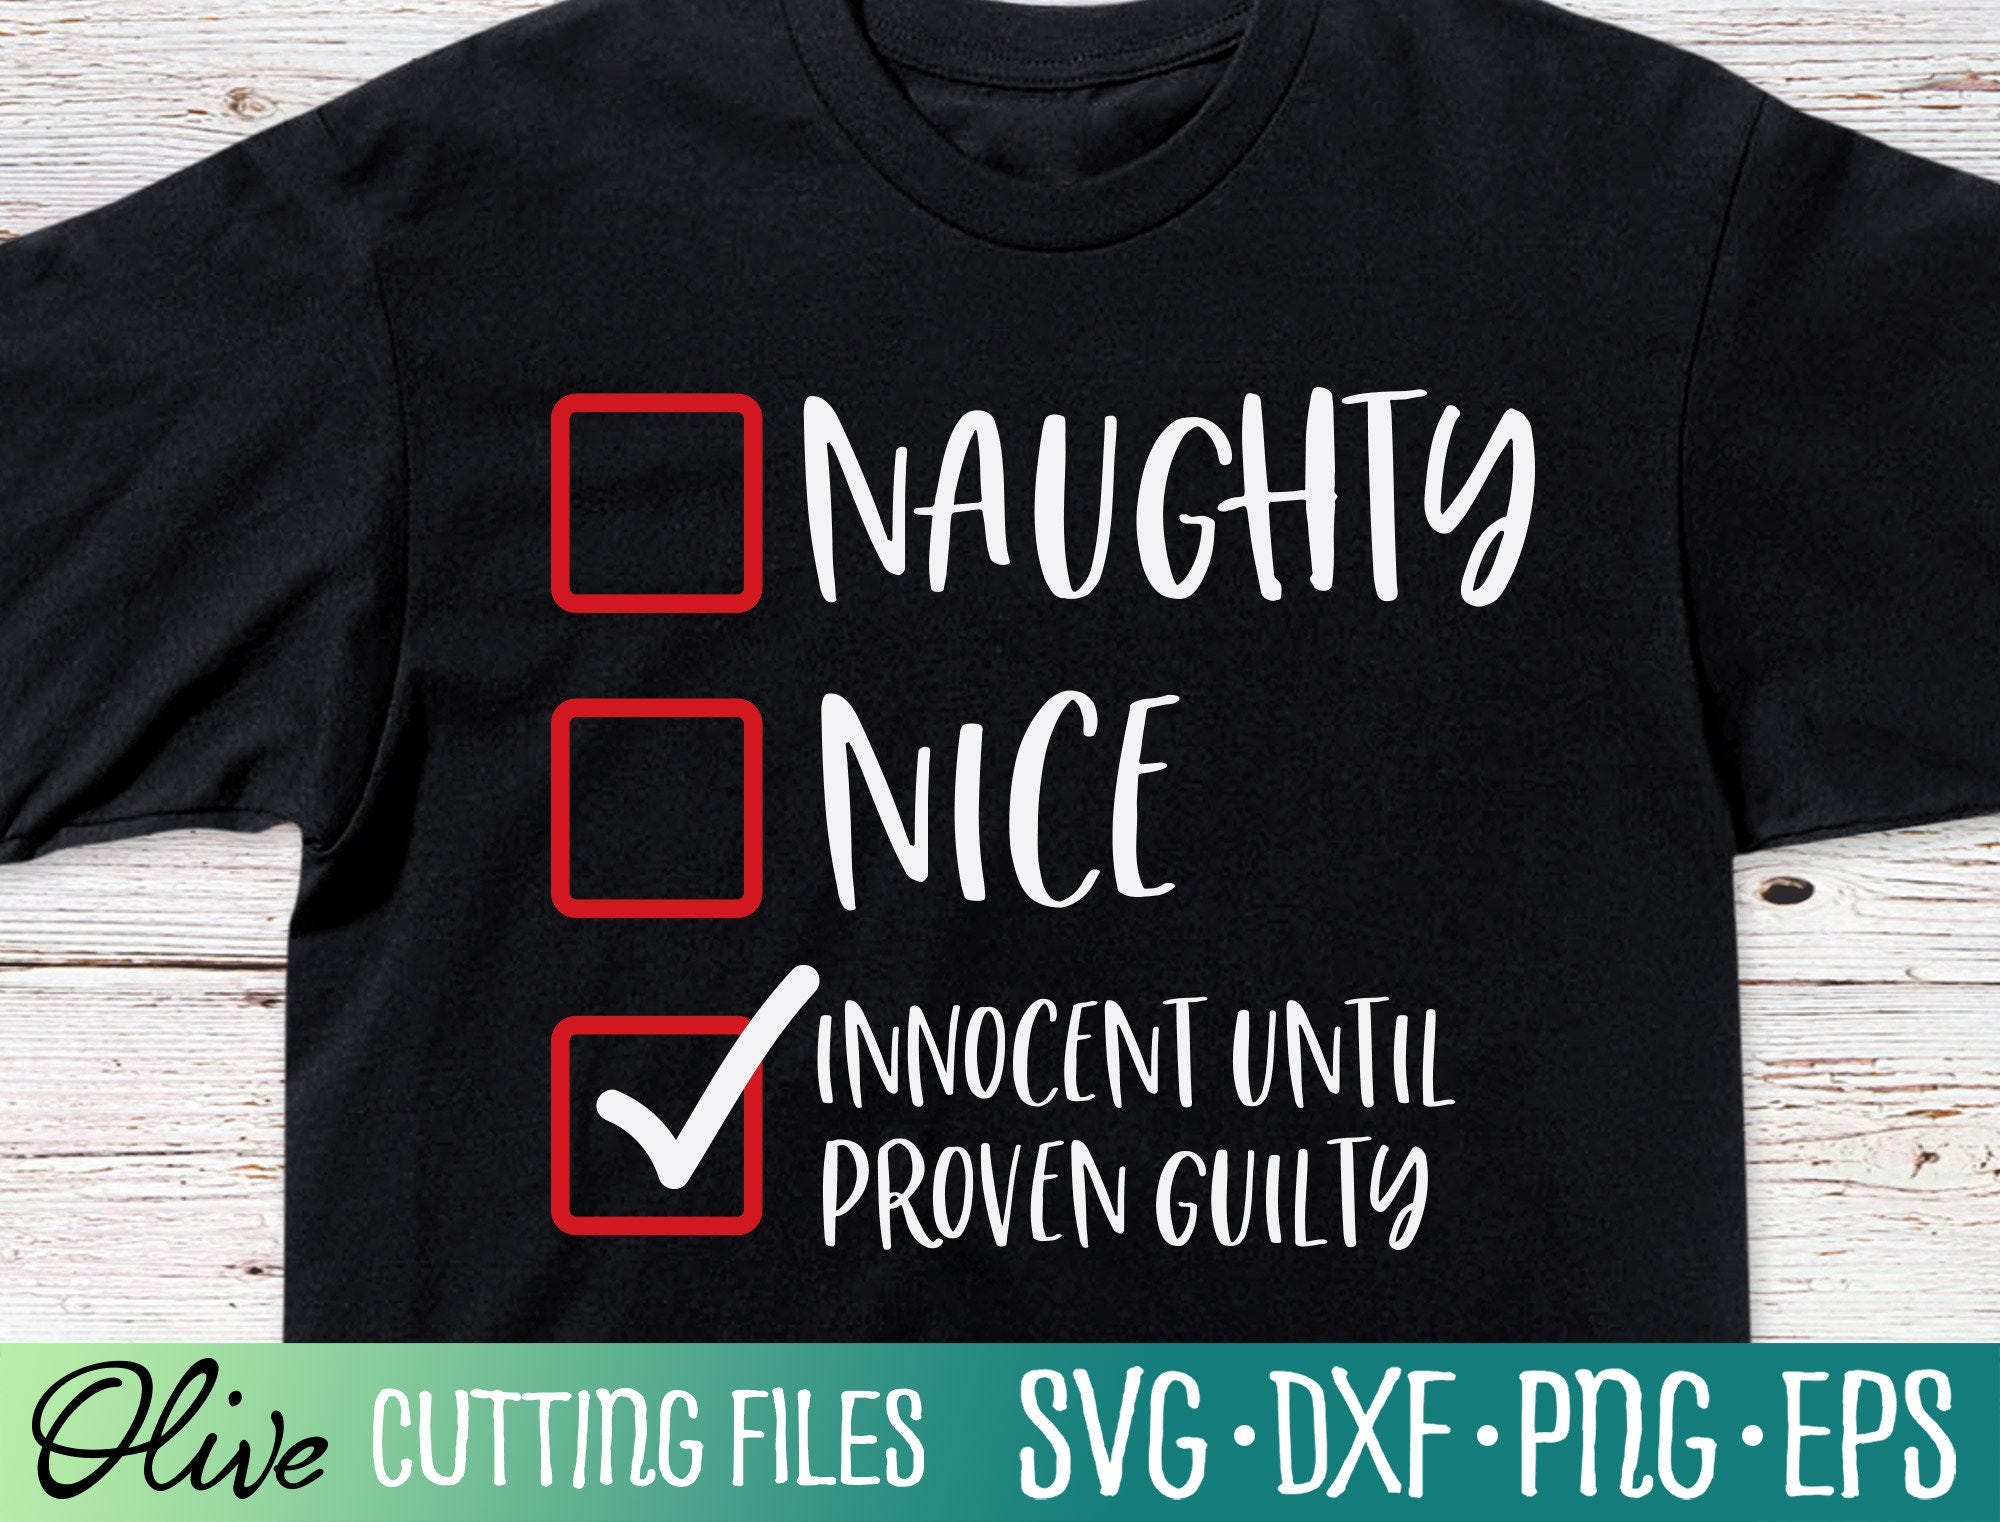 Funny Christmas Shirt Svg, Funny Holiday Svg, Naughty Nice Innocent Until Proven Guilty svg, Cameo Cricut, Cut File, Silhouette, Cricut